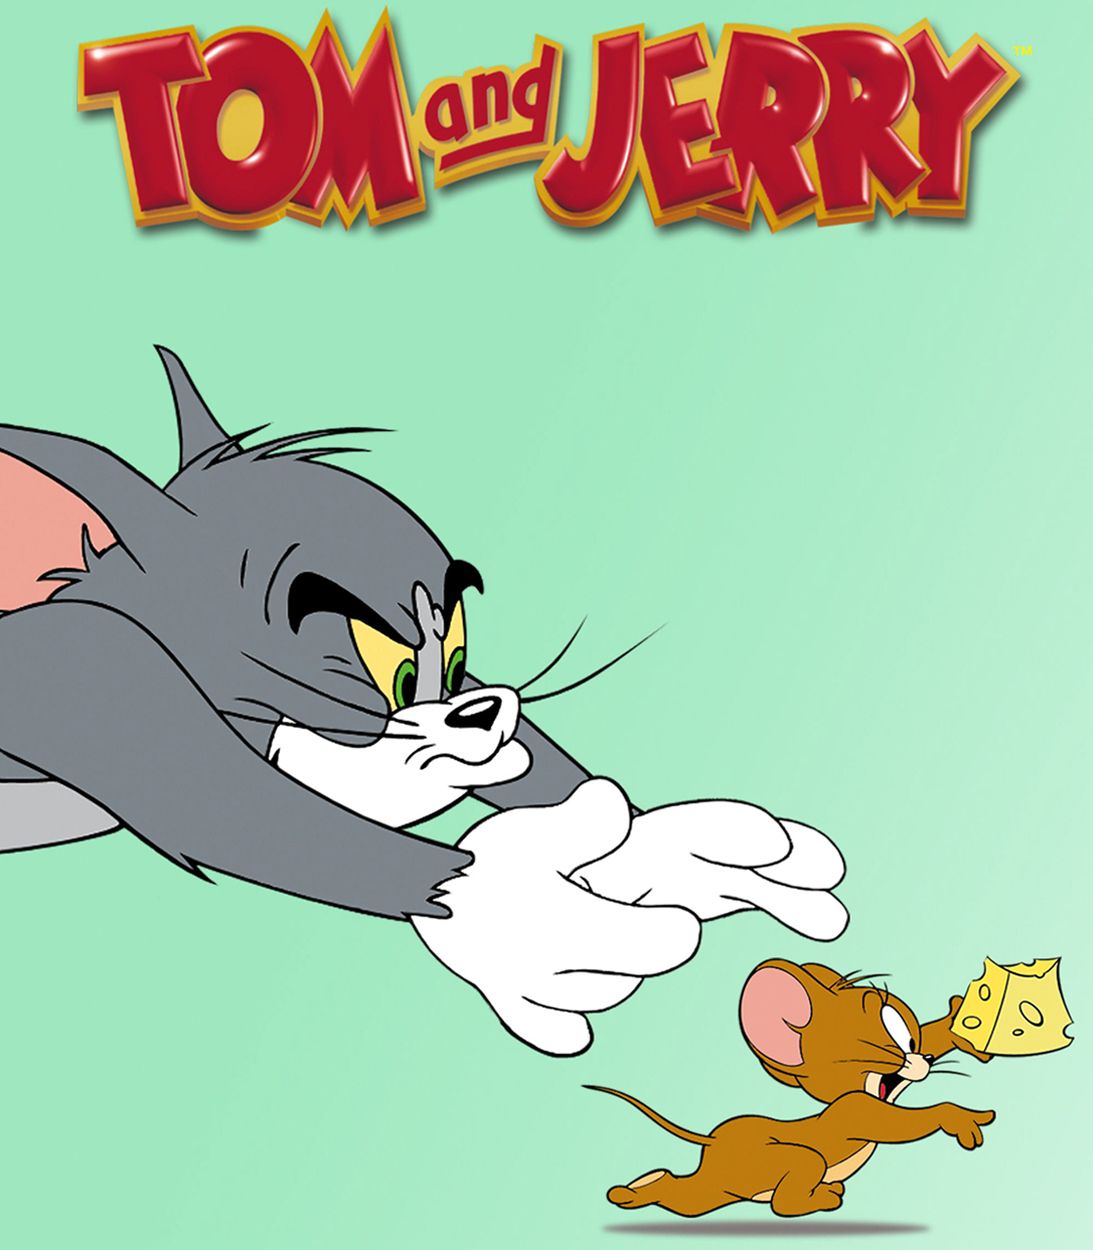 Tom and Jerry running vertical